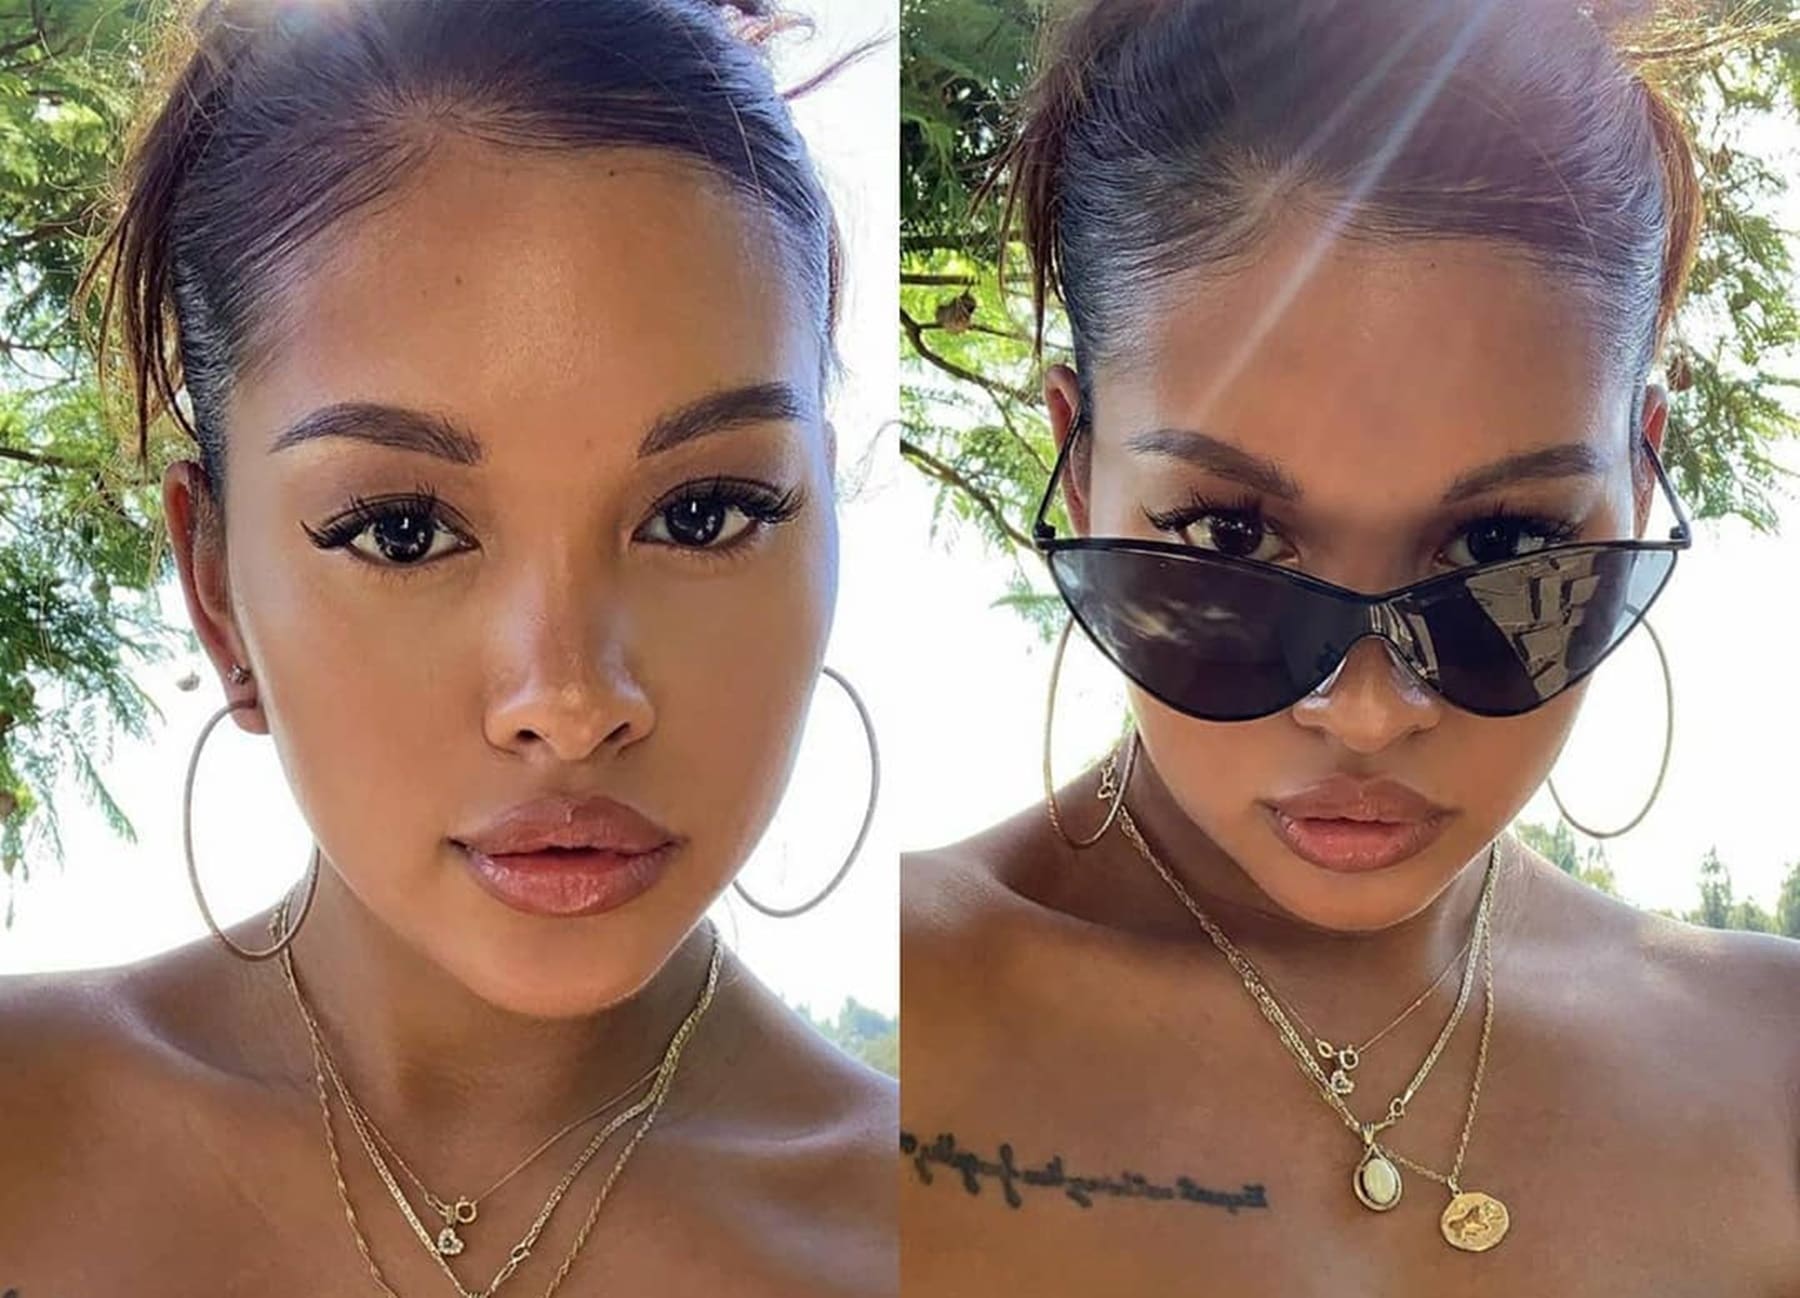 Chris Brown's Baby Mama, Ammika Harris' Latest Photos Featuring baby Aeko Have Fans Saying He'll Be A Heartbreaker When He Grows Up!